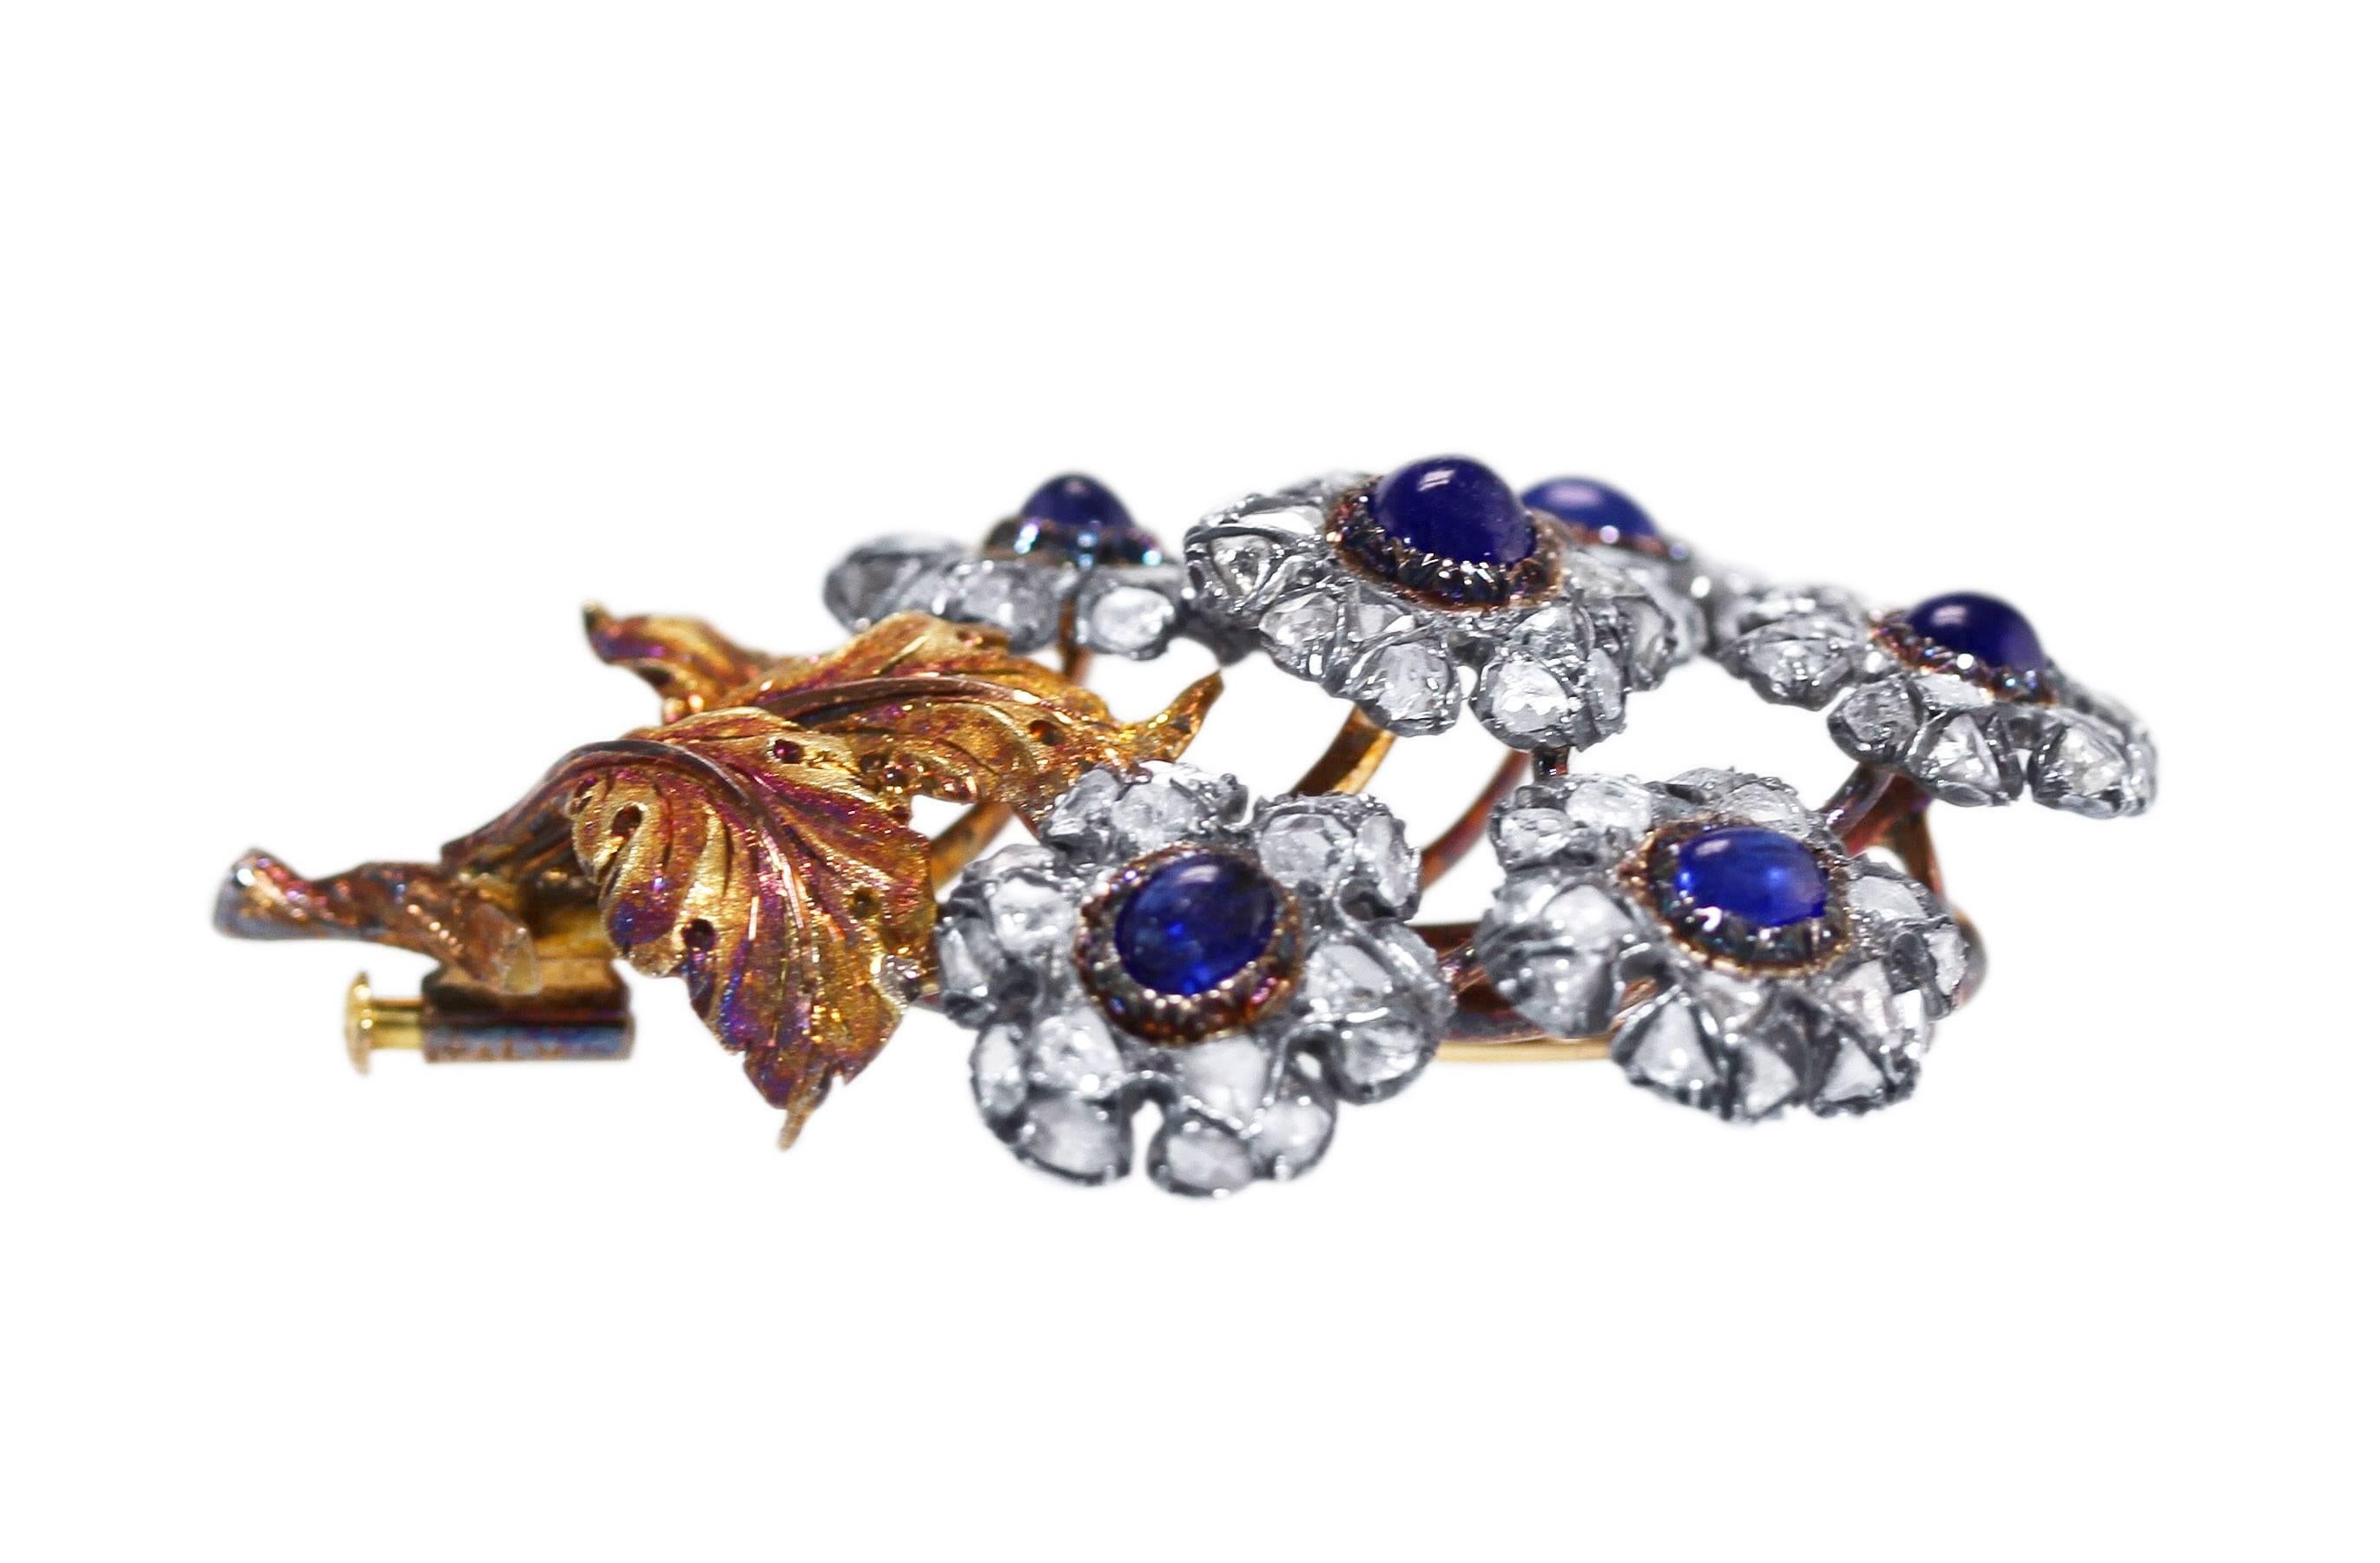 18 Karat Gold, Silver, Sapphire and Diamond Brooch by Mario Buccellati, Italy, circa 1935
• Signed Buccellati, Italy
• Accompanied by a recent Buccellati appraisal stating the replacement value as $64,000
• 6 cabochon sapphires, approximately 3.00